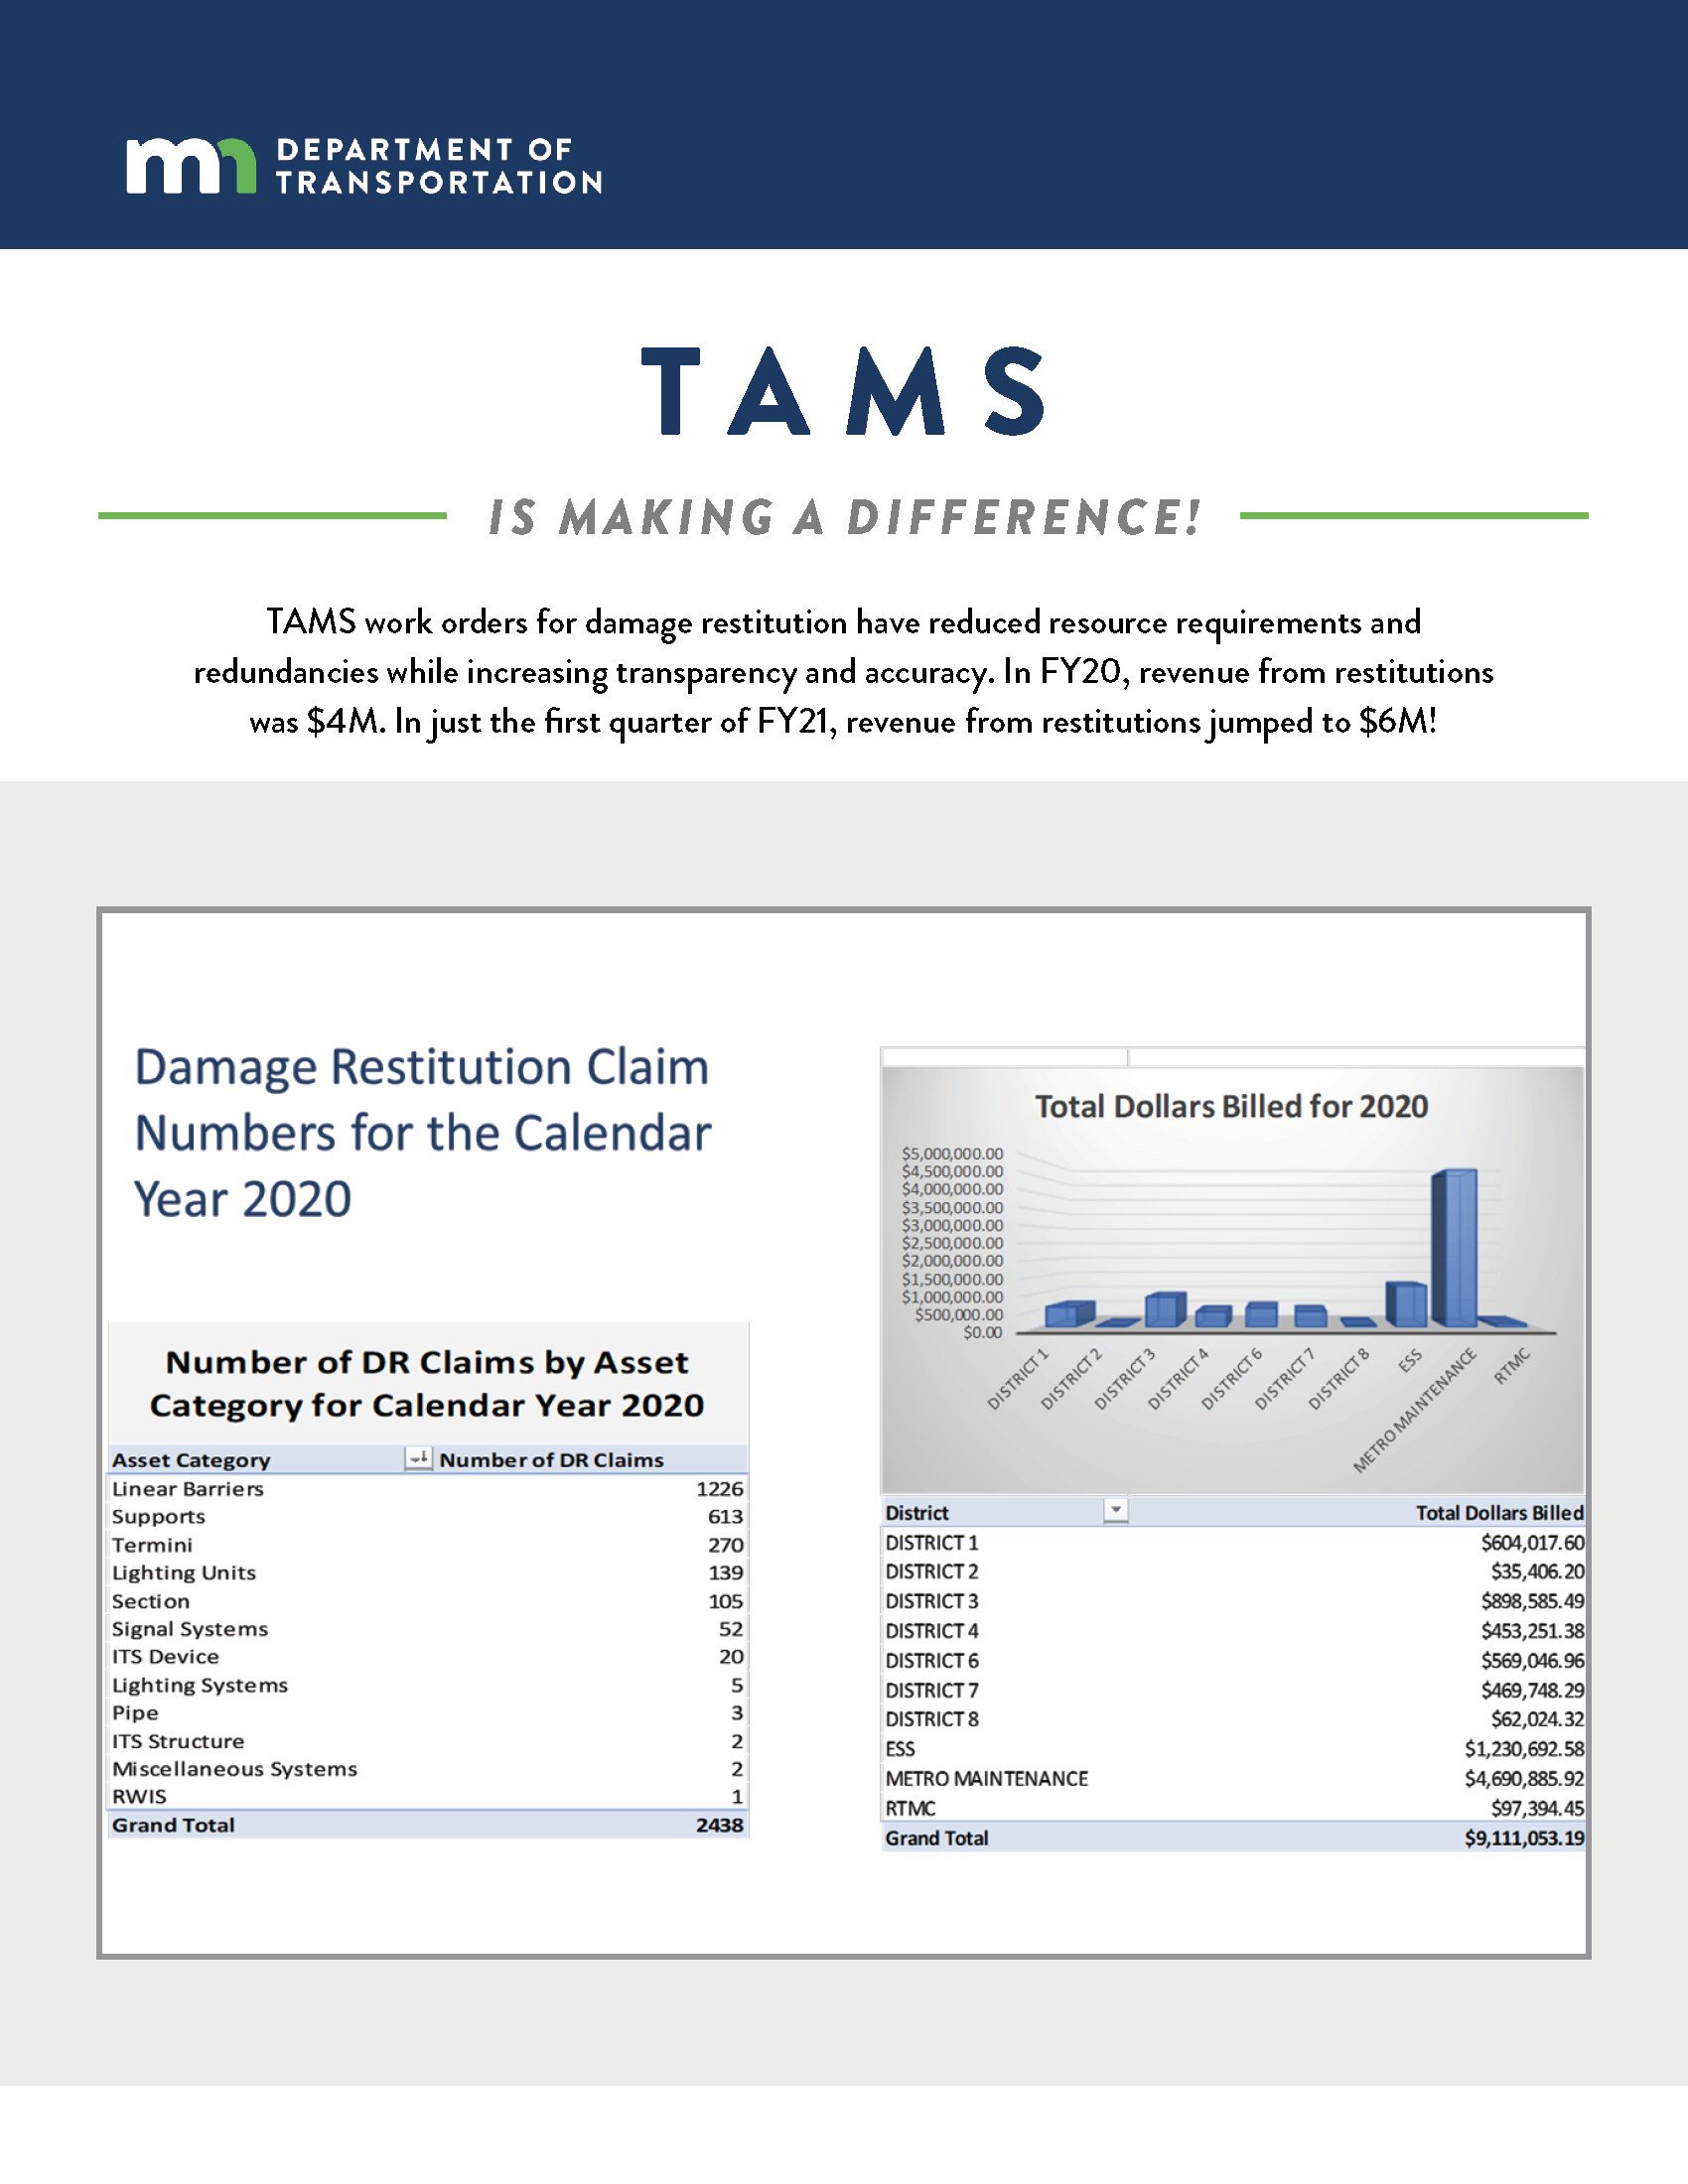 TAMS is Making a Difference - Restitution (flyer)